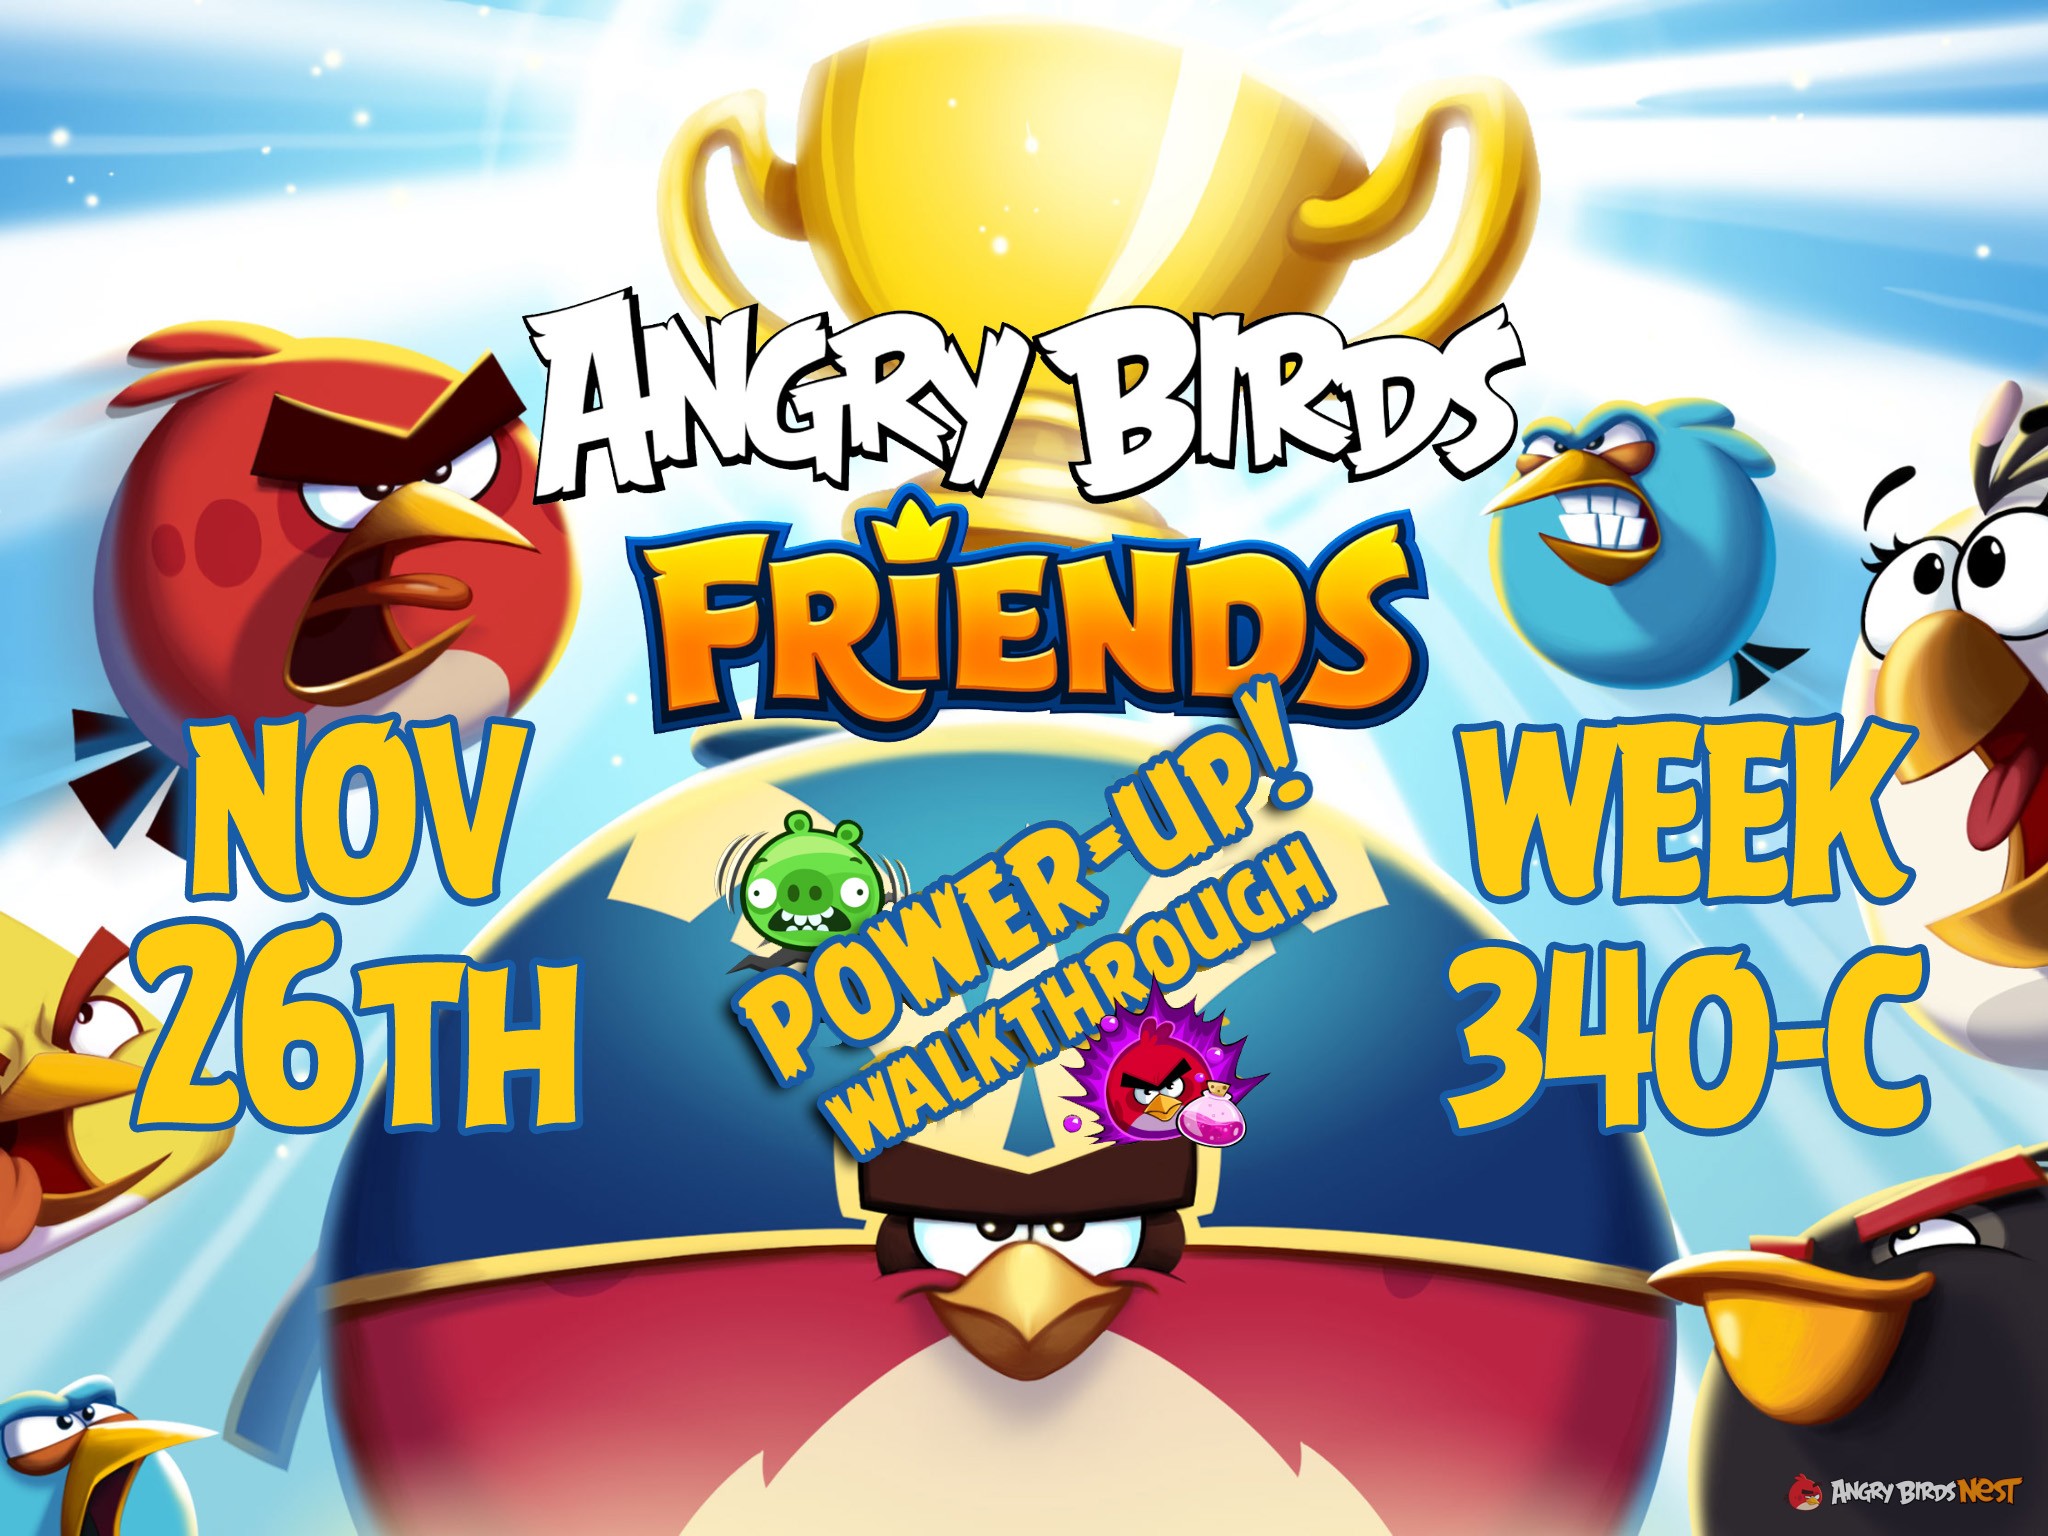 Angry-Birds-Friends-Tournament-Week-340-C-Feature-Image-PU